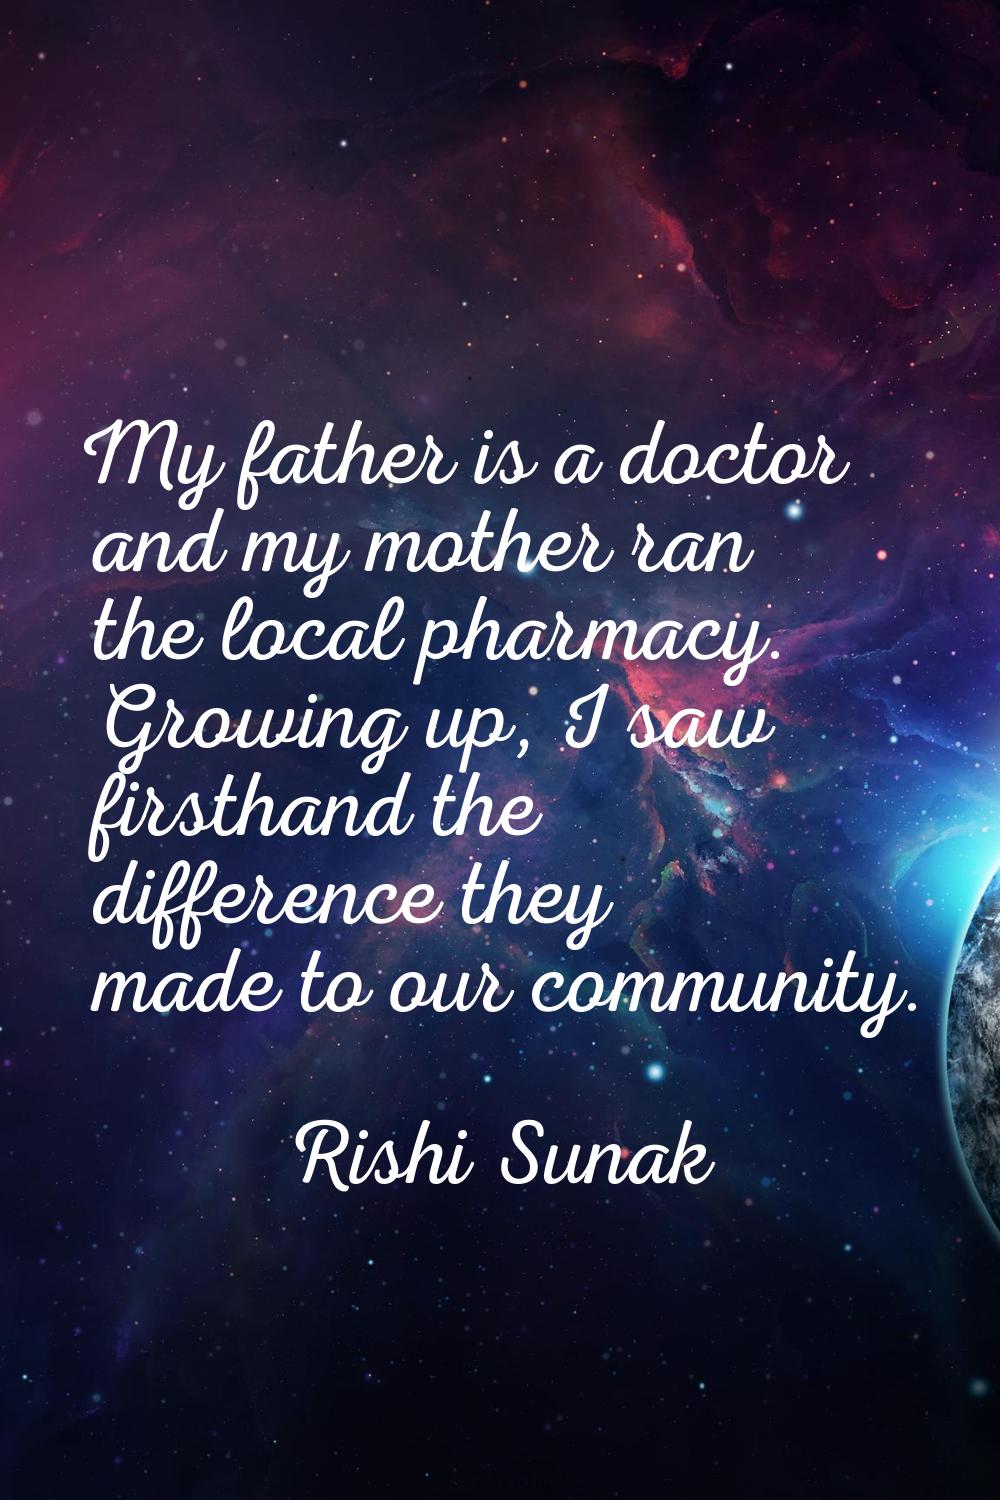 My father is a doctor and my mother ran the local pharmacy. Growing up, I saw firsthand the differe